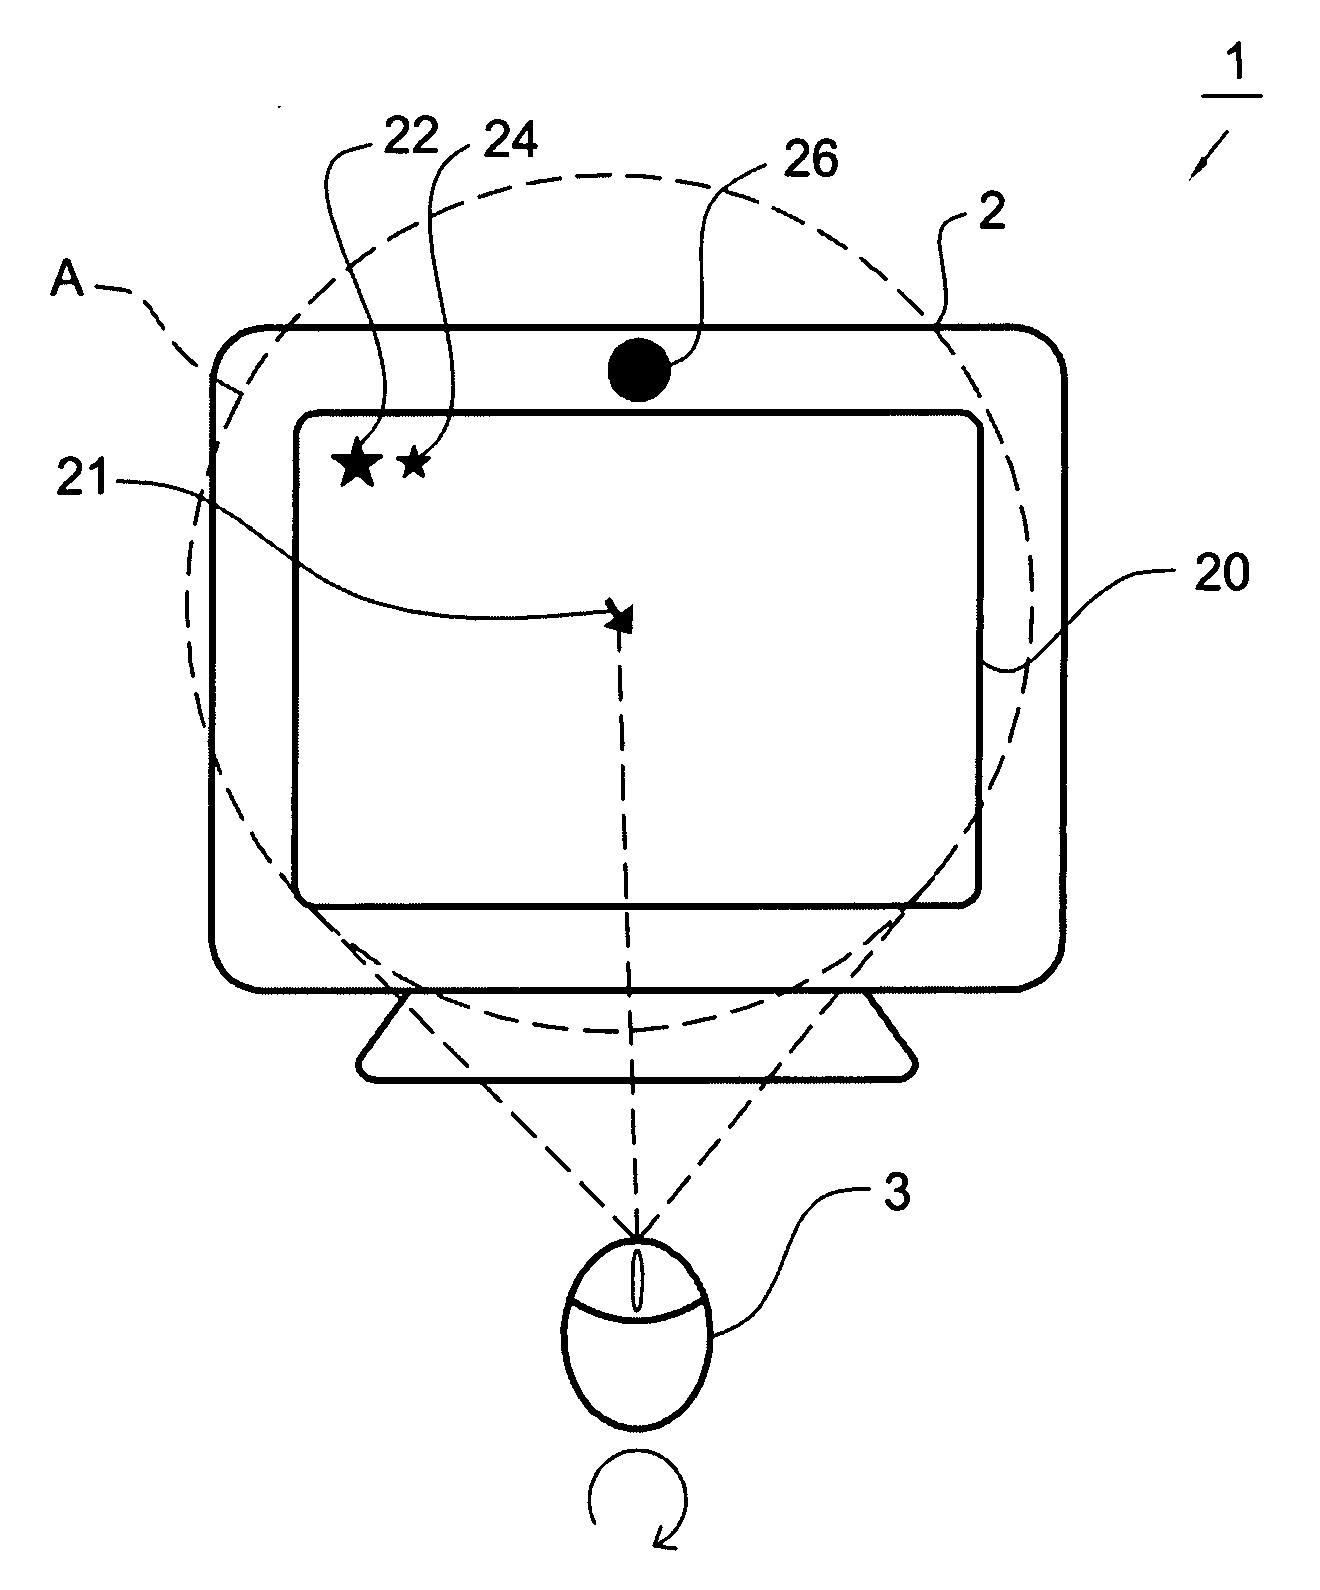 Cursor control device and method for an image display, and image system